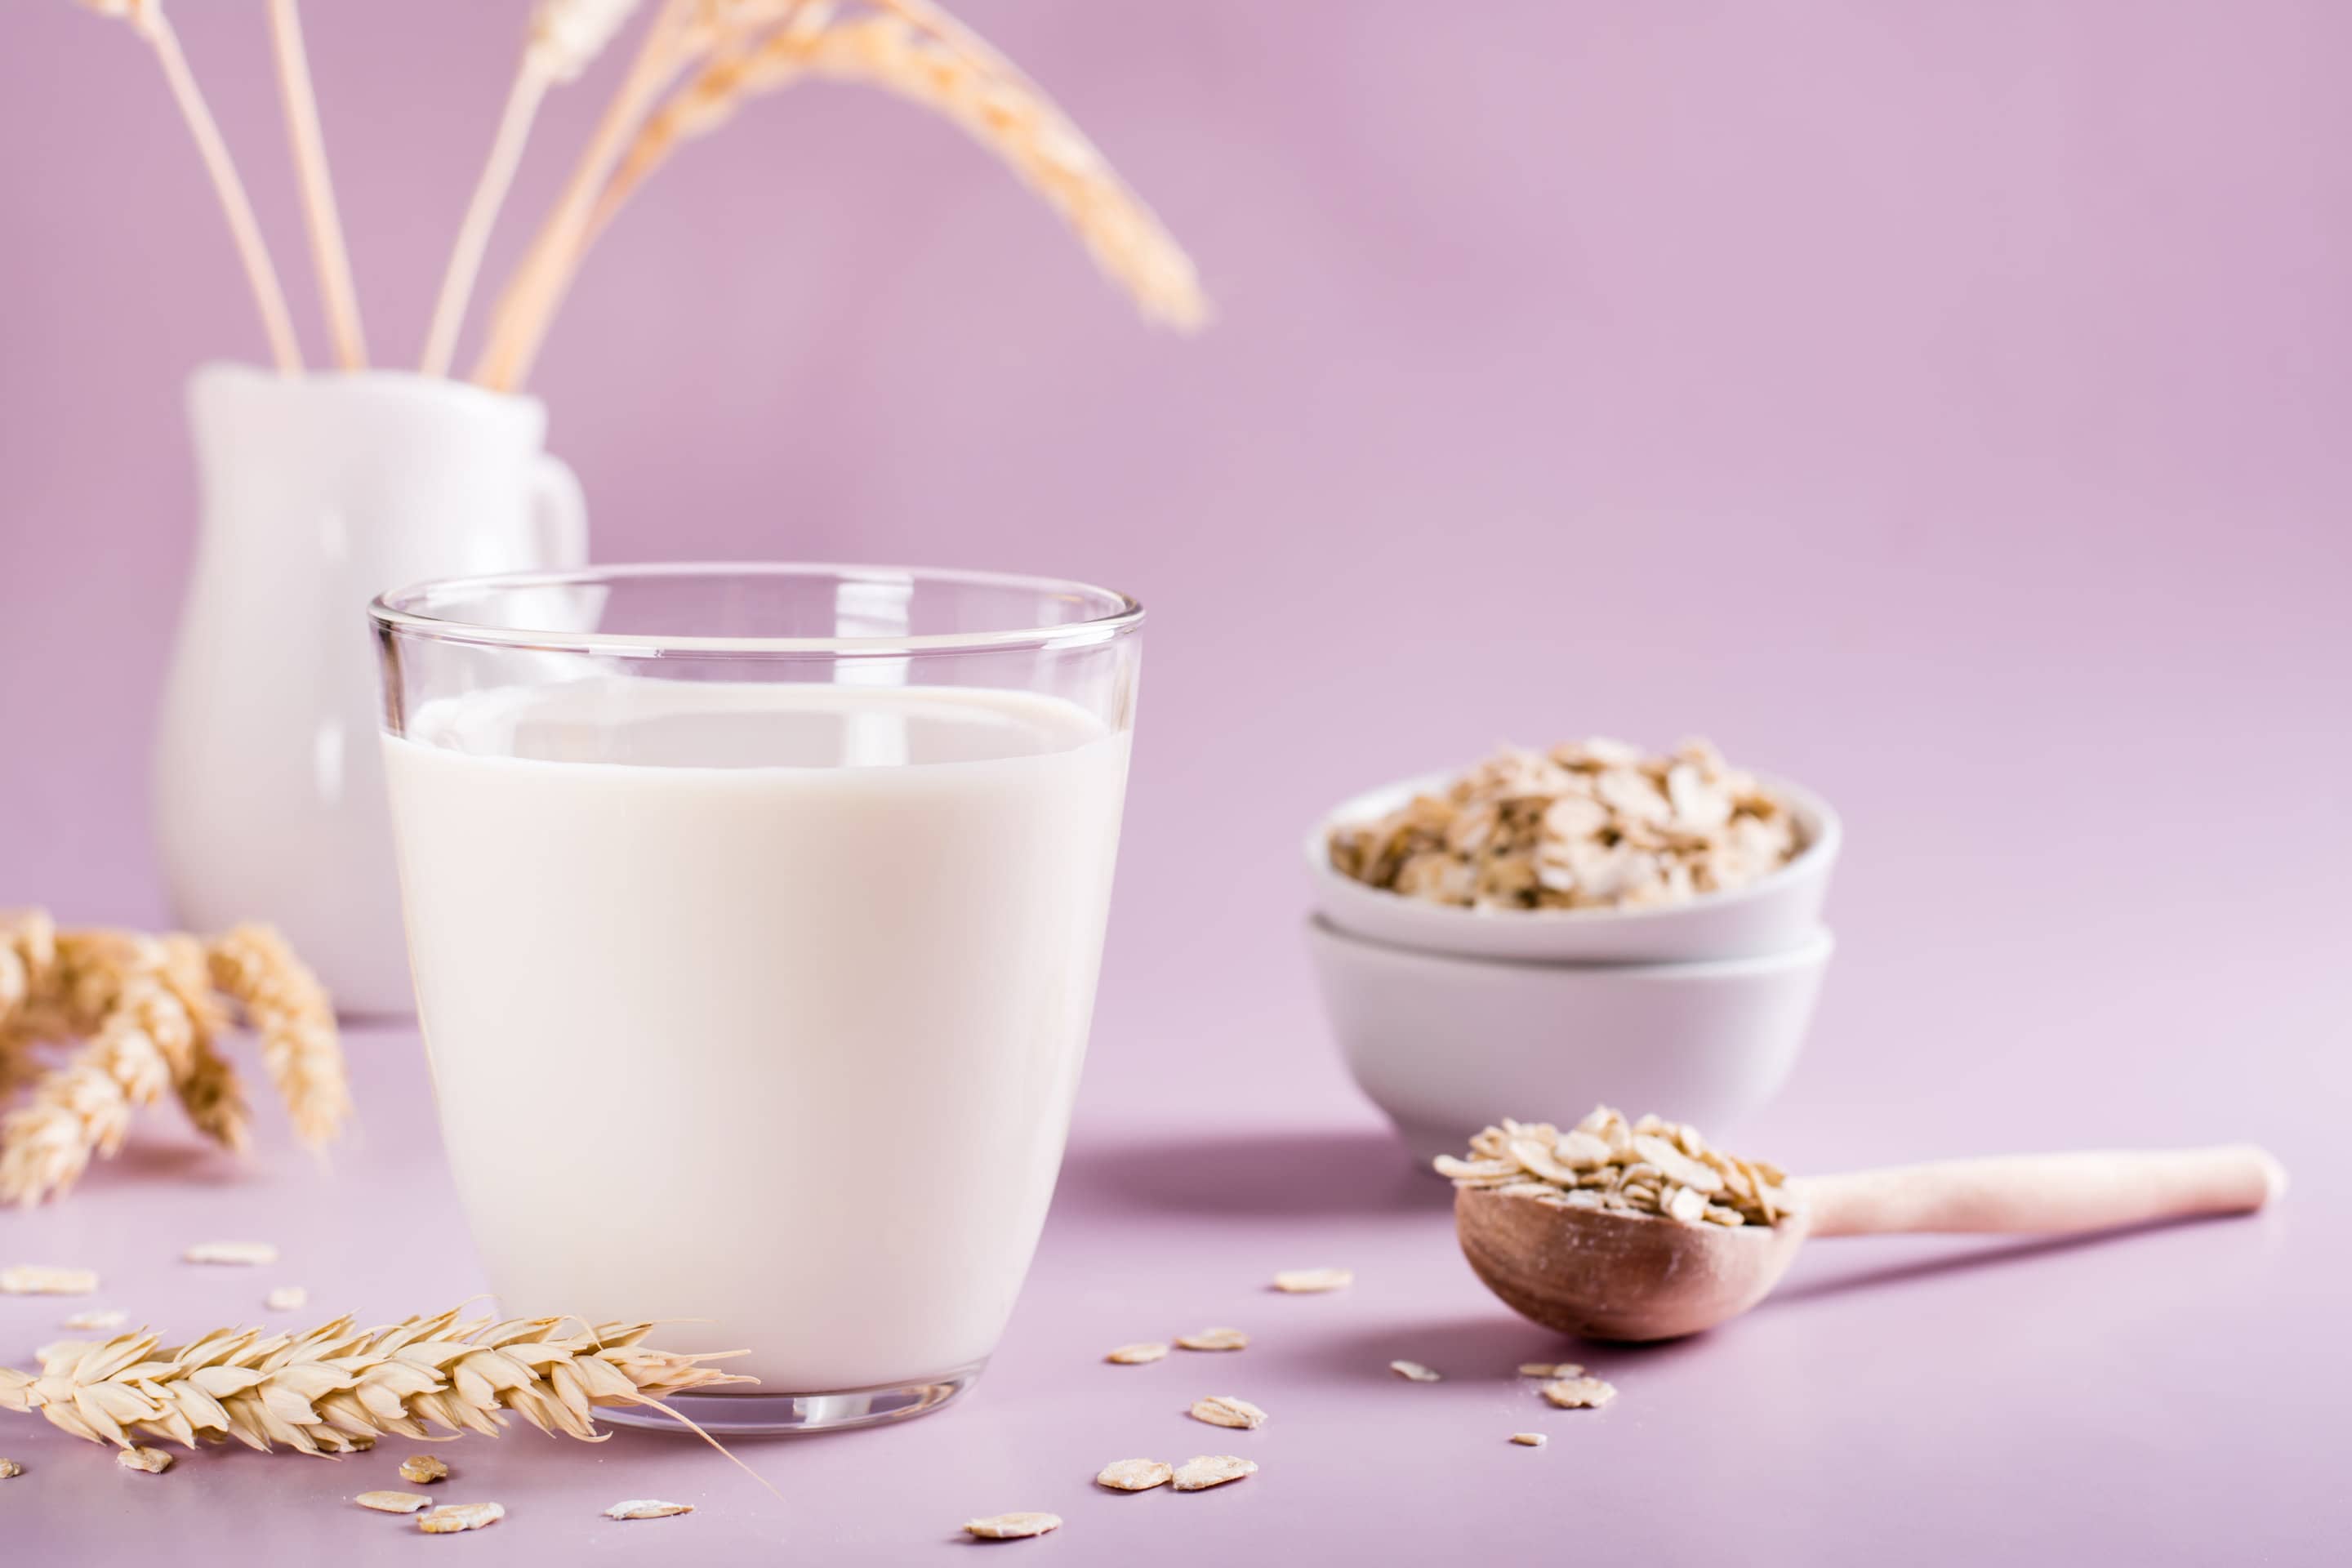 Homemade oat milk in a glass and oatmeal on the table